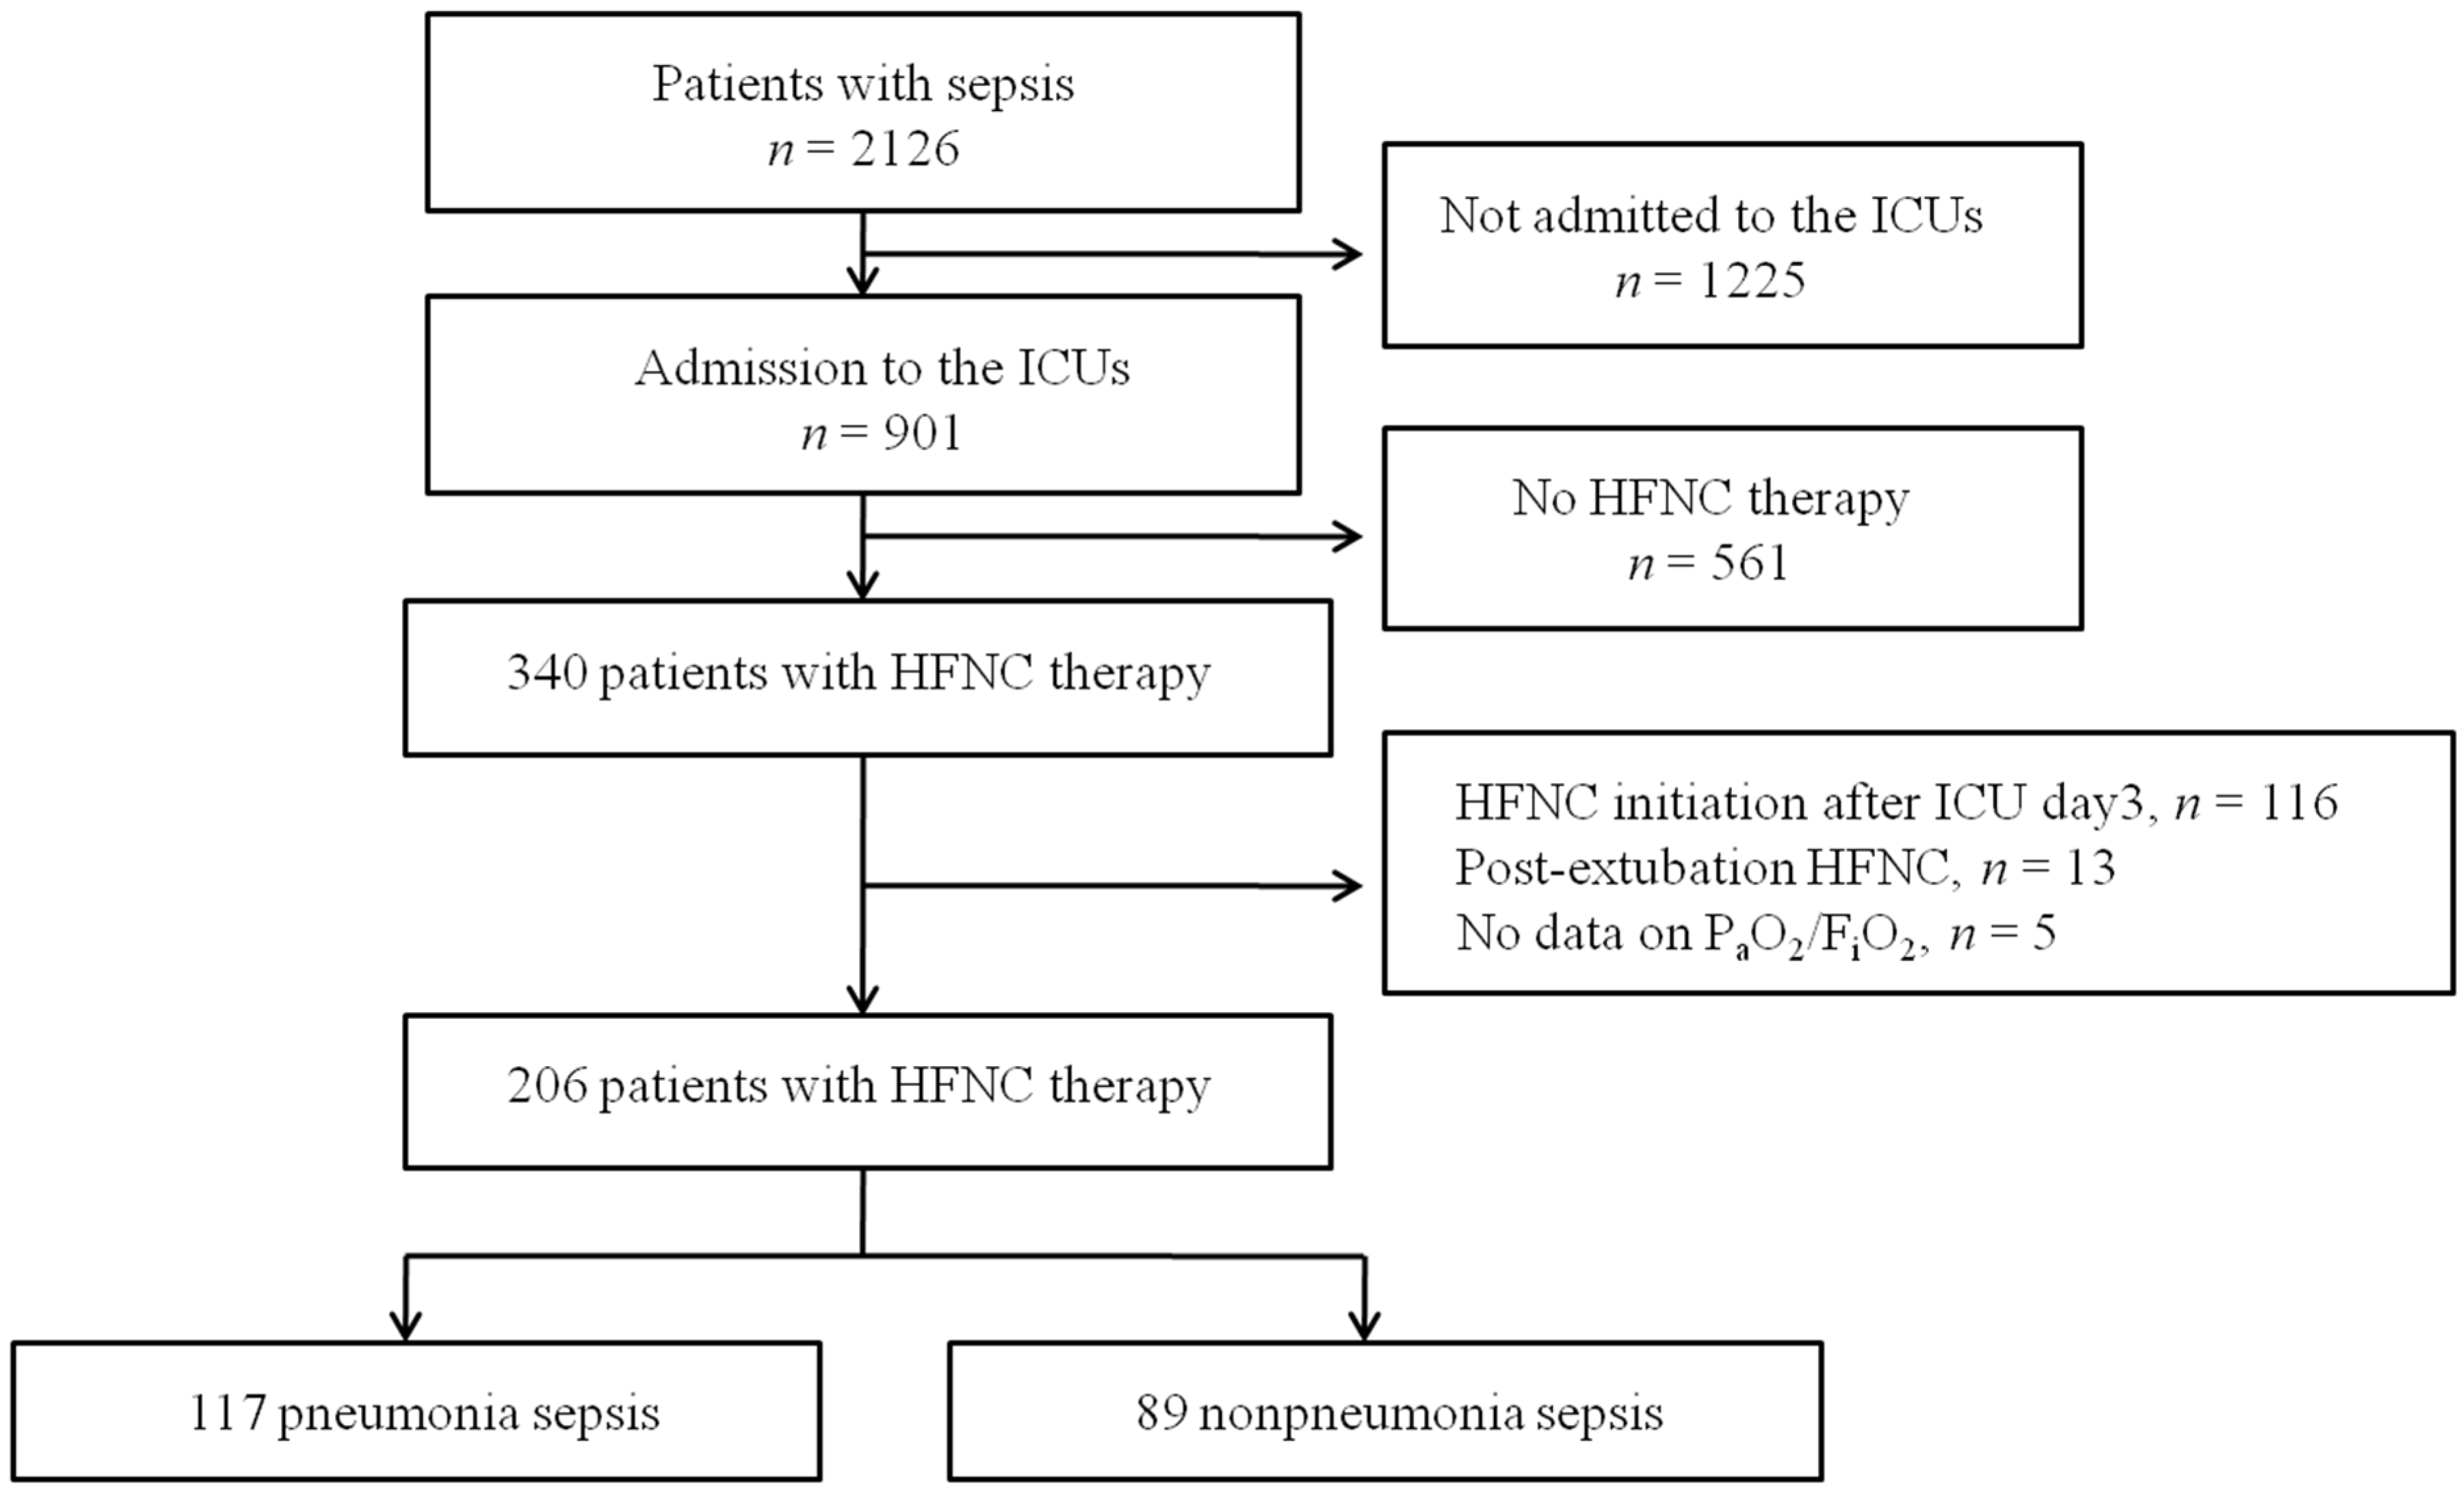 JCM | Free Full-Text | Failure of High-Flow Nasal Cannula Therapy in  Pneumonia and Non-Pneumonia Sepsis Patients: A Prospective Cohort Study |  HTML